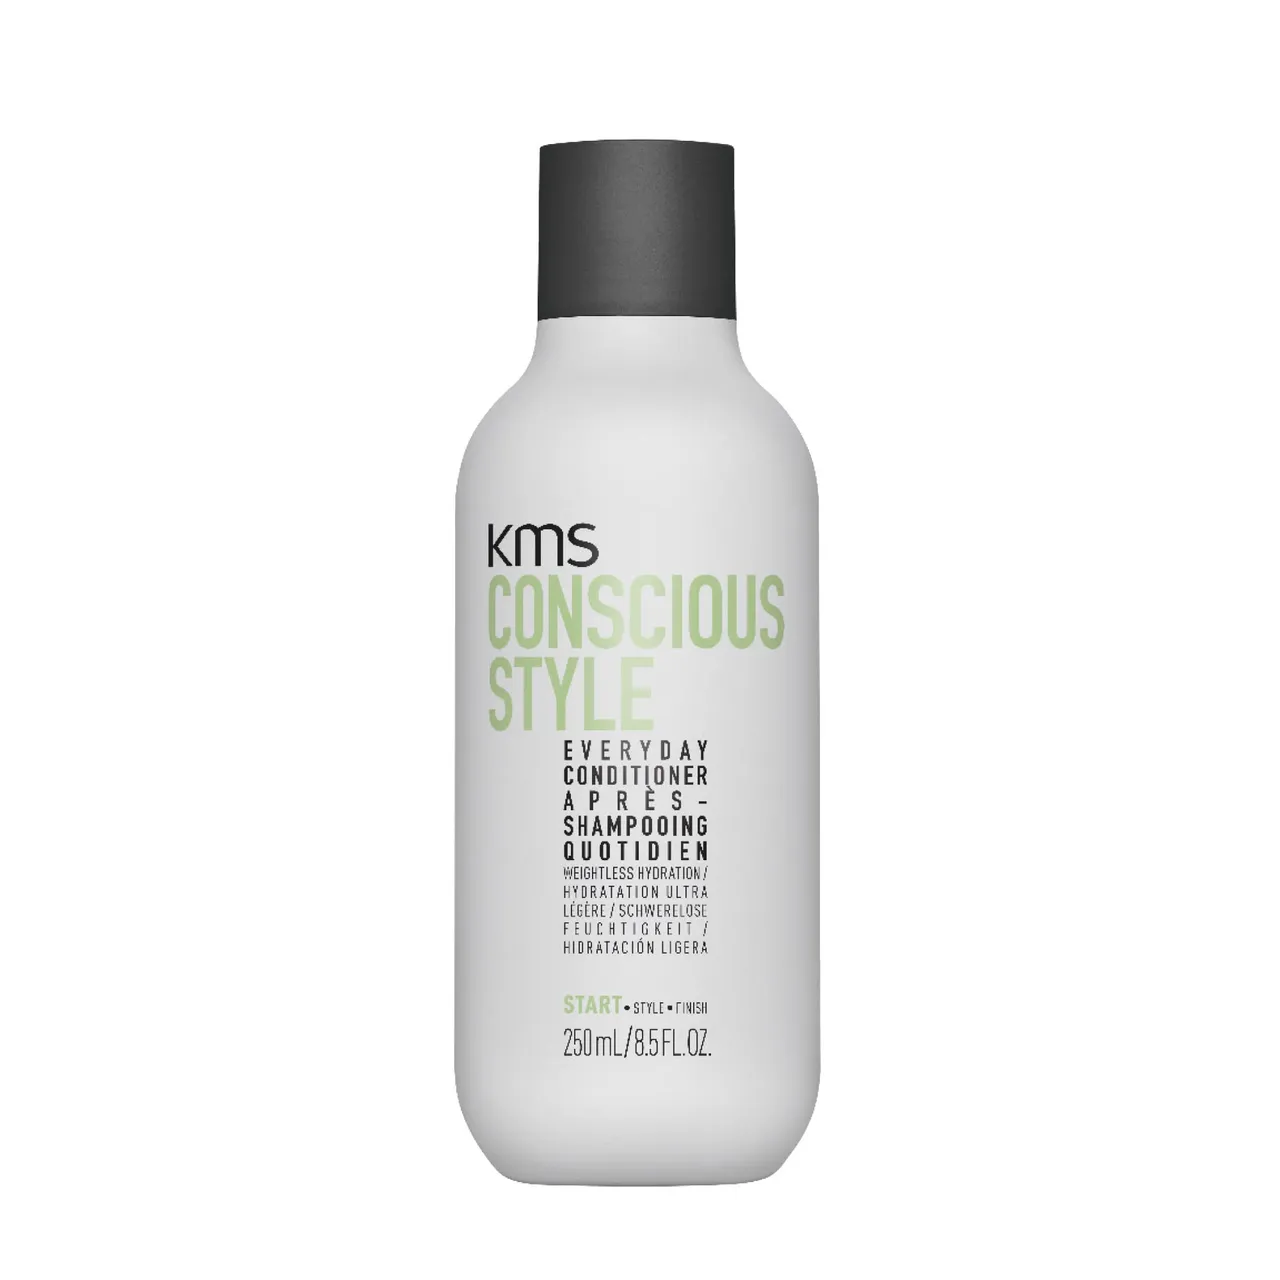 KMS Conscious Style Everyday Conditioner for All Hair Types